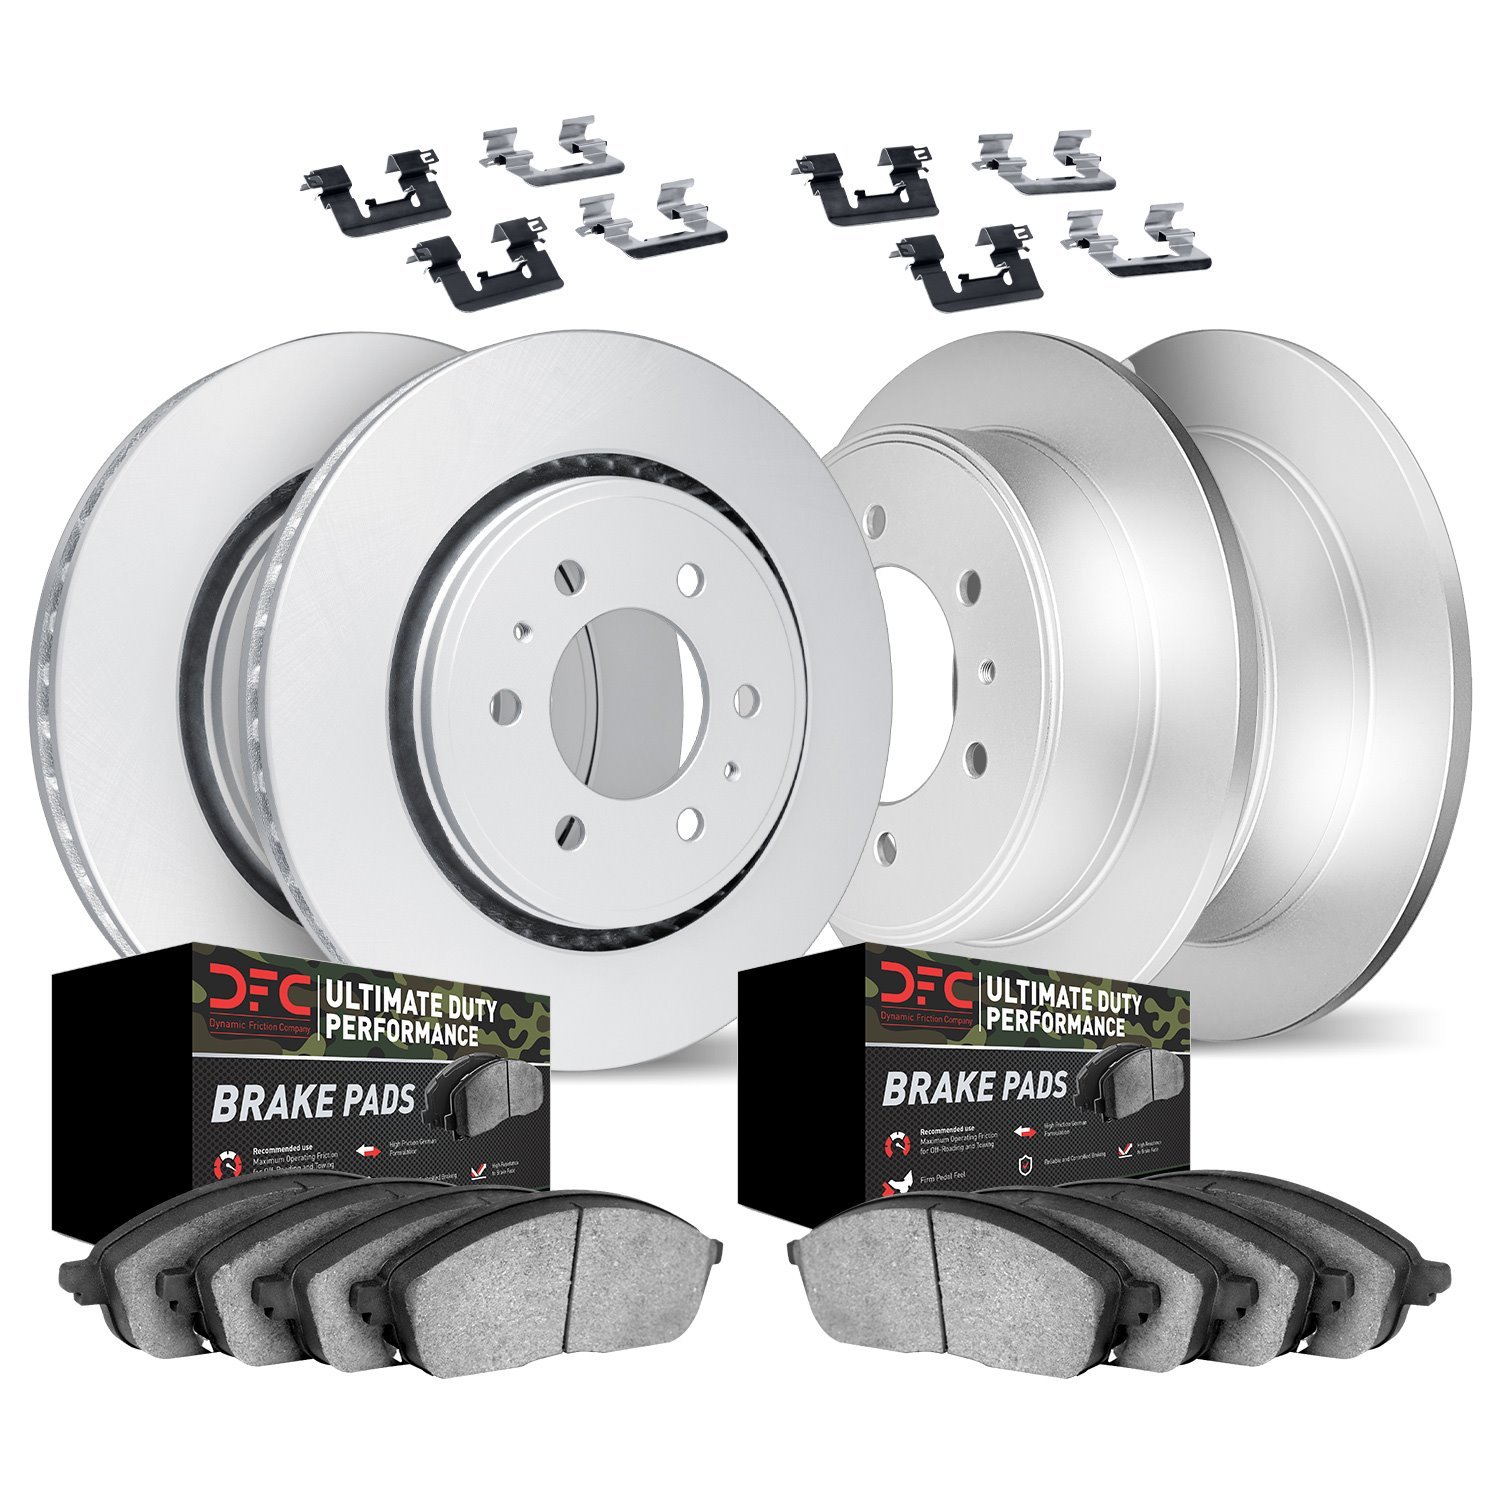 4414-67002 Geospec Brake Rotors with Ultimate-Duty Brake Pads & Hardware, 2005-2007 Infiniti/Nissan, Position: Front and Rear